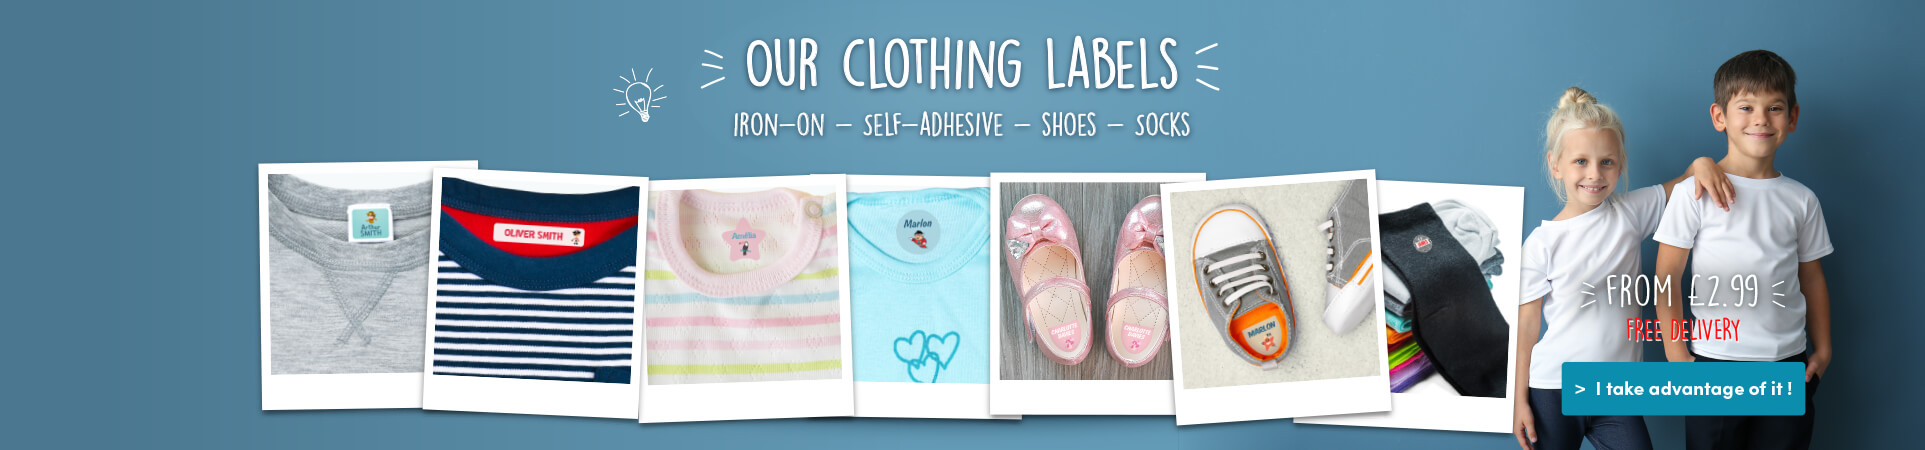 Our clothing labels